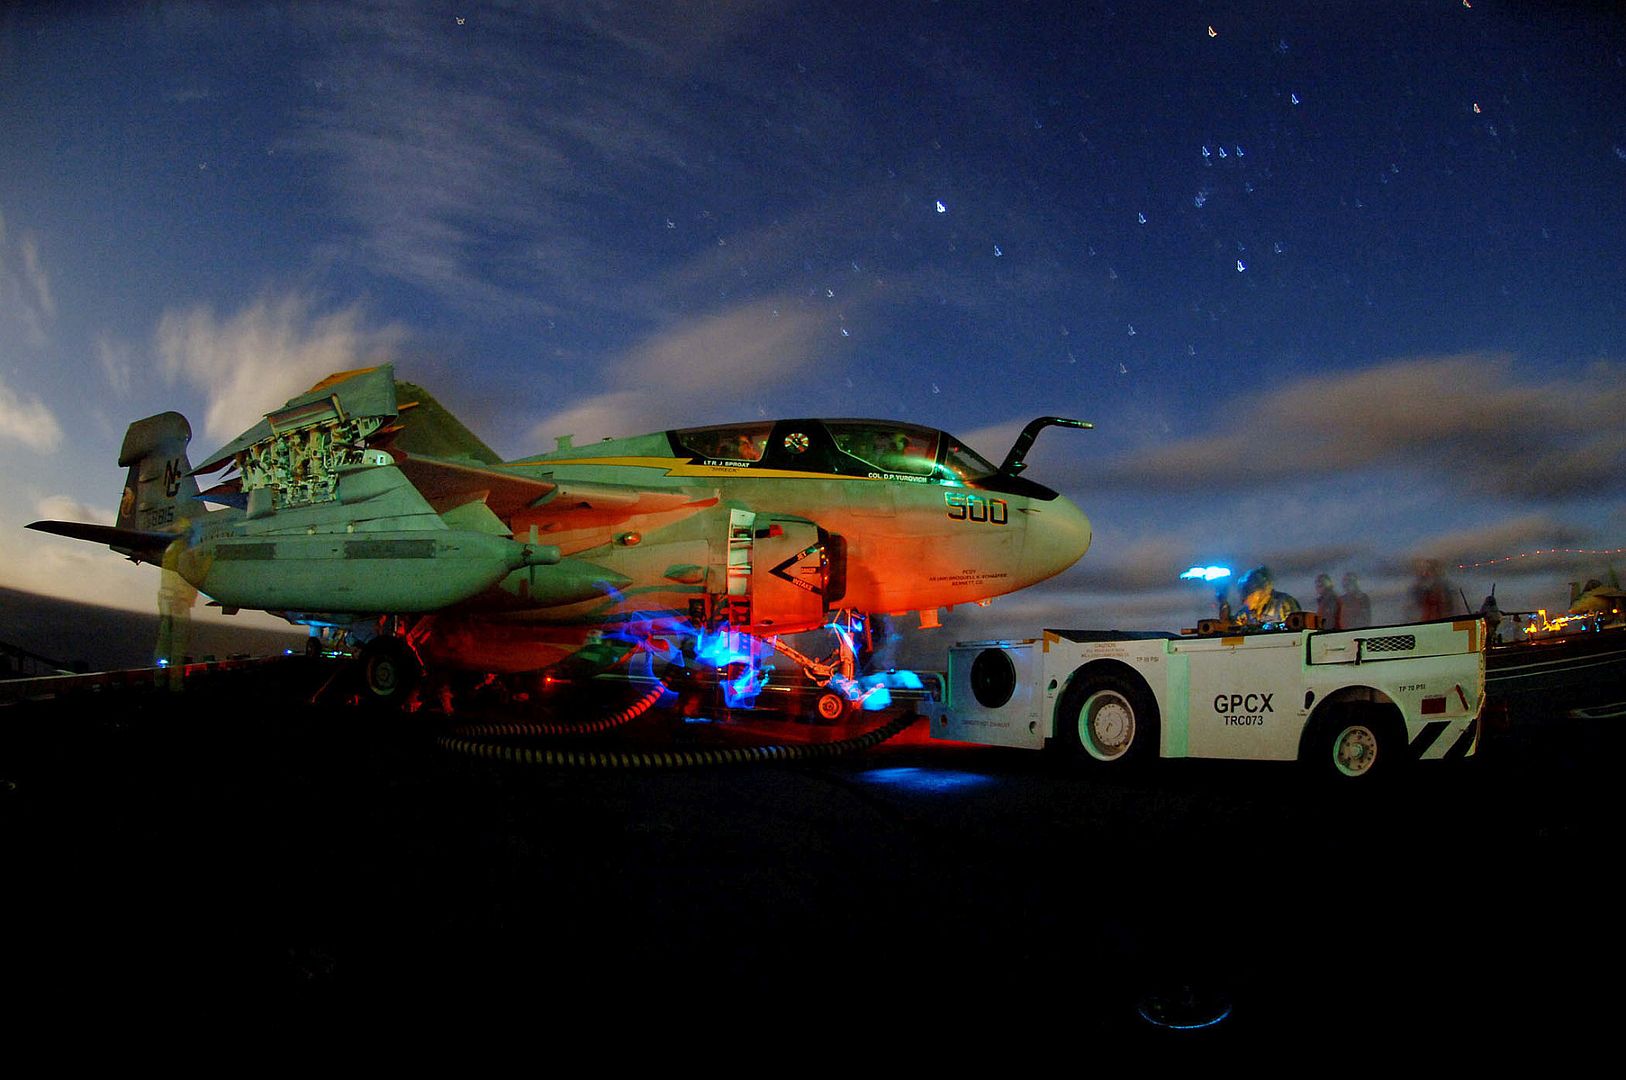 6B Prowler Aircraft For Nighttime Flight Operations Aboard The USN Nimitz